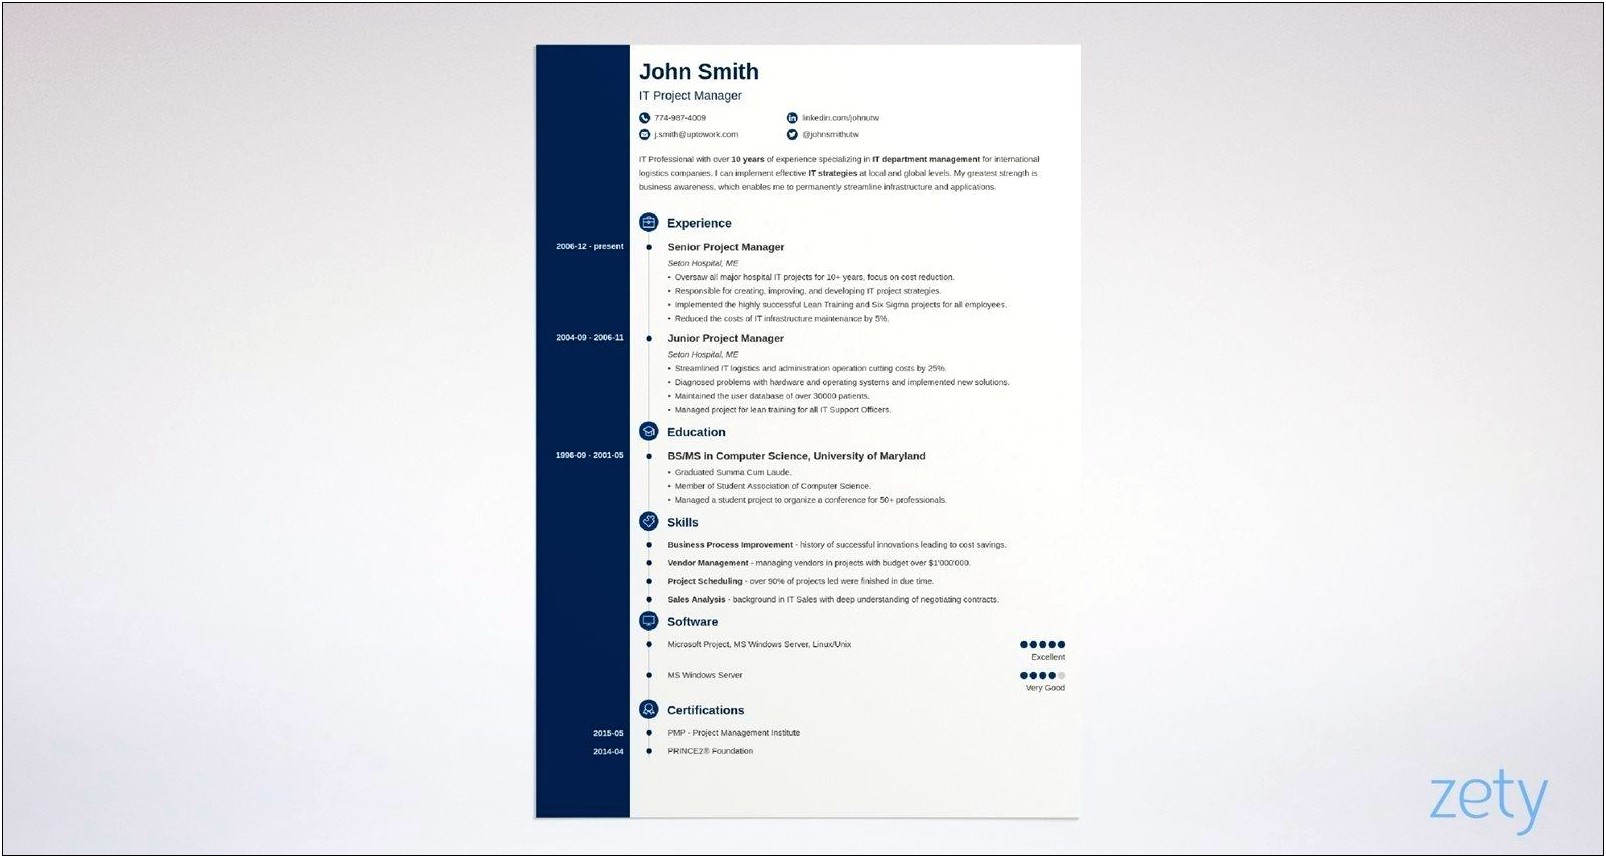 Good Resume Word To Gather Information